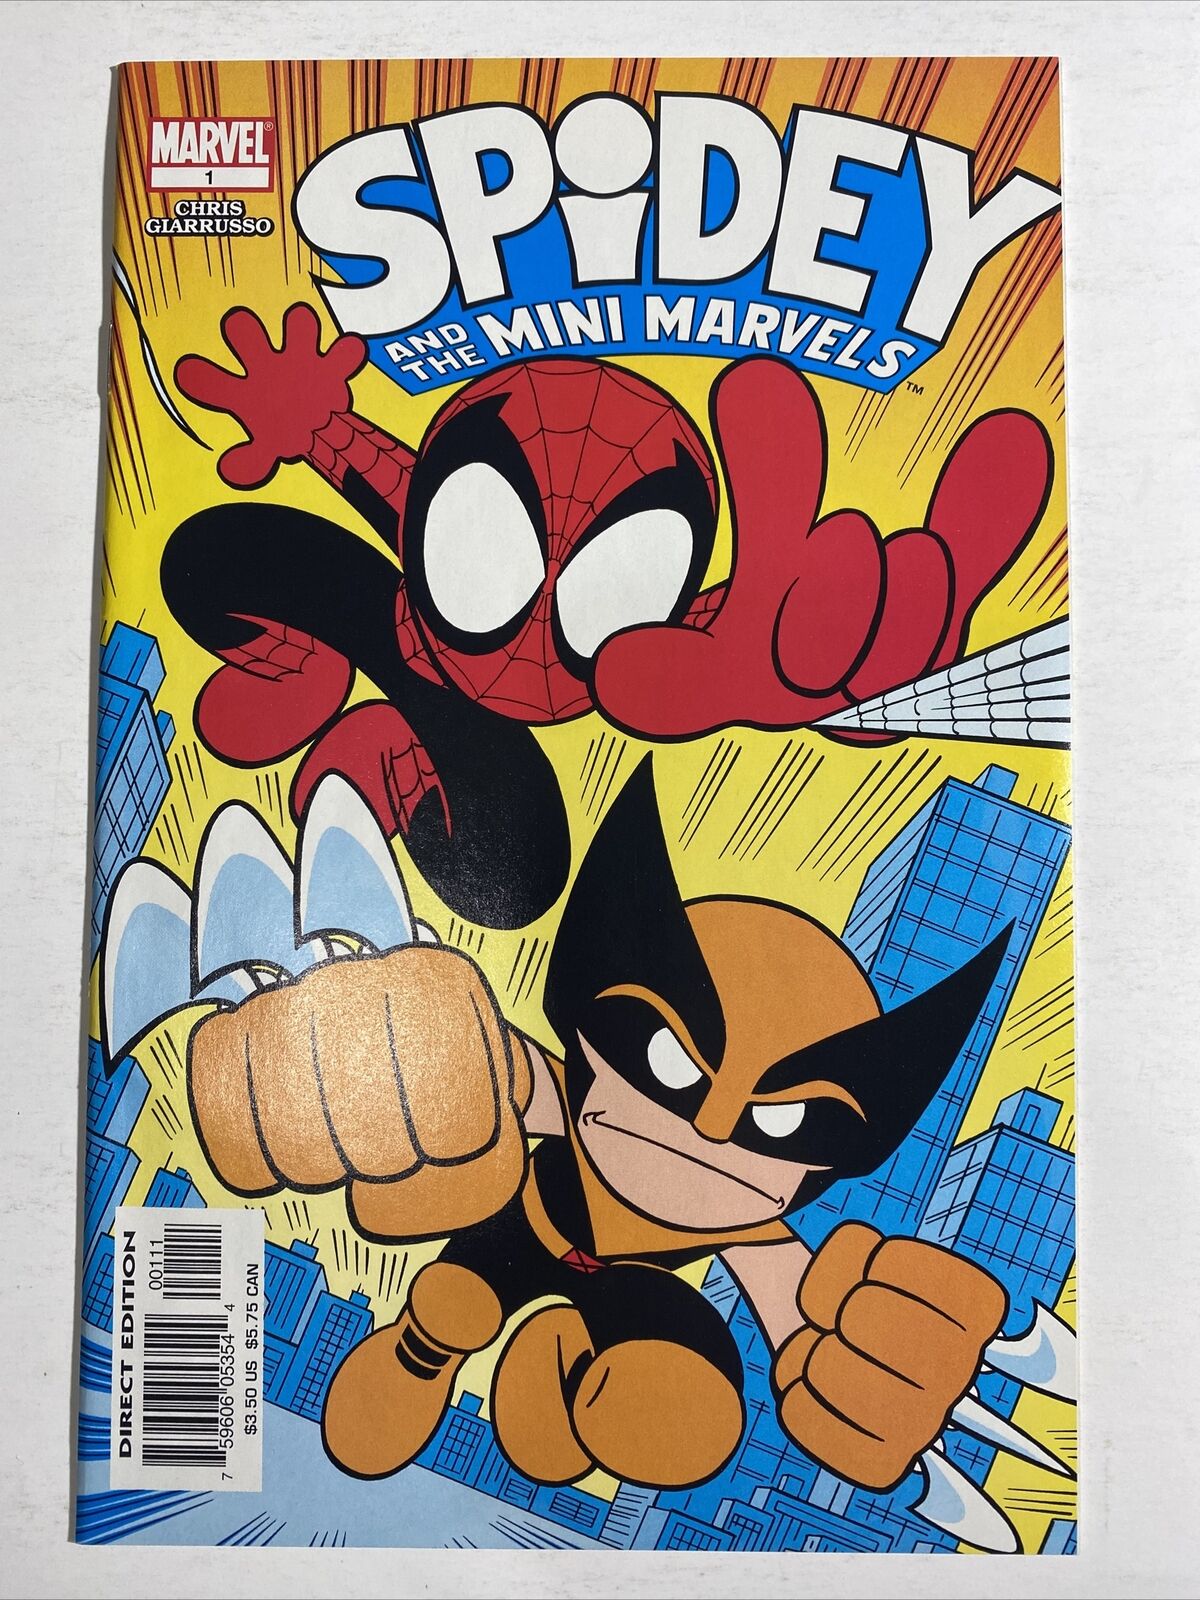 SPIDEY AND THE MINI MARVELS #1, MARVEL COMICS, 2003, CHRIS GIARRUSSO MCU